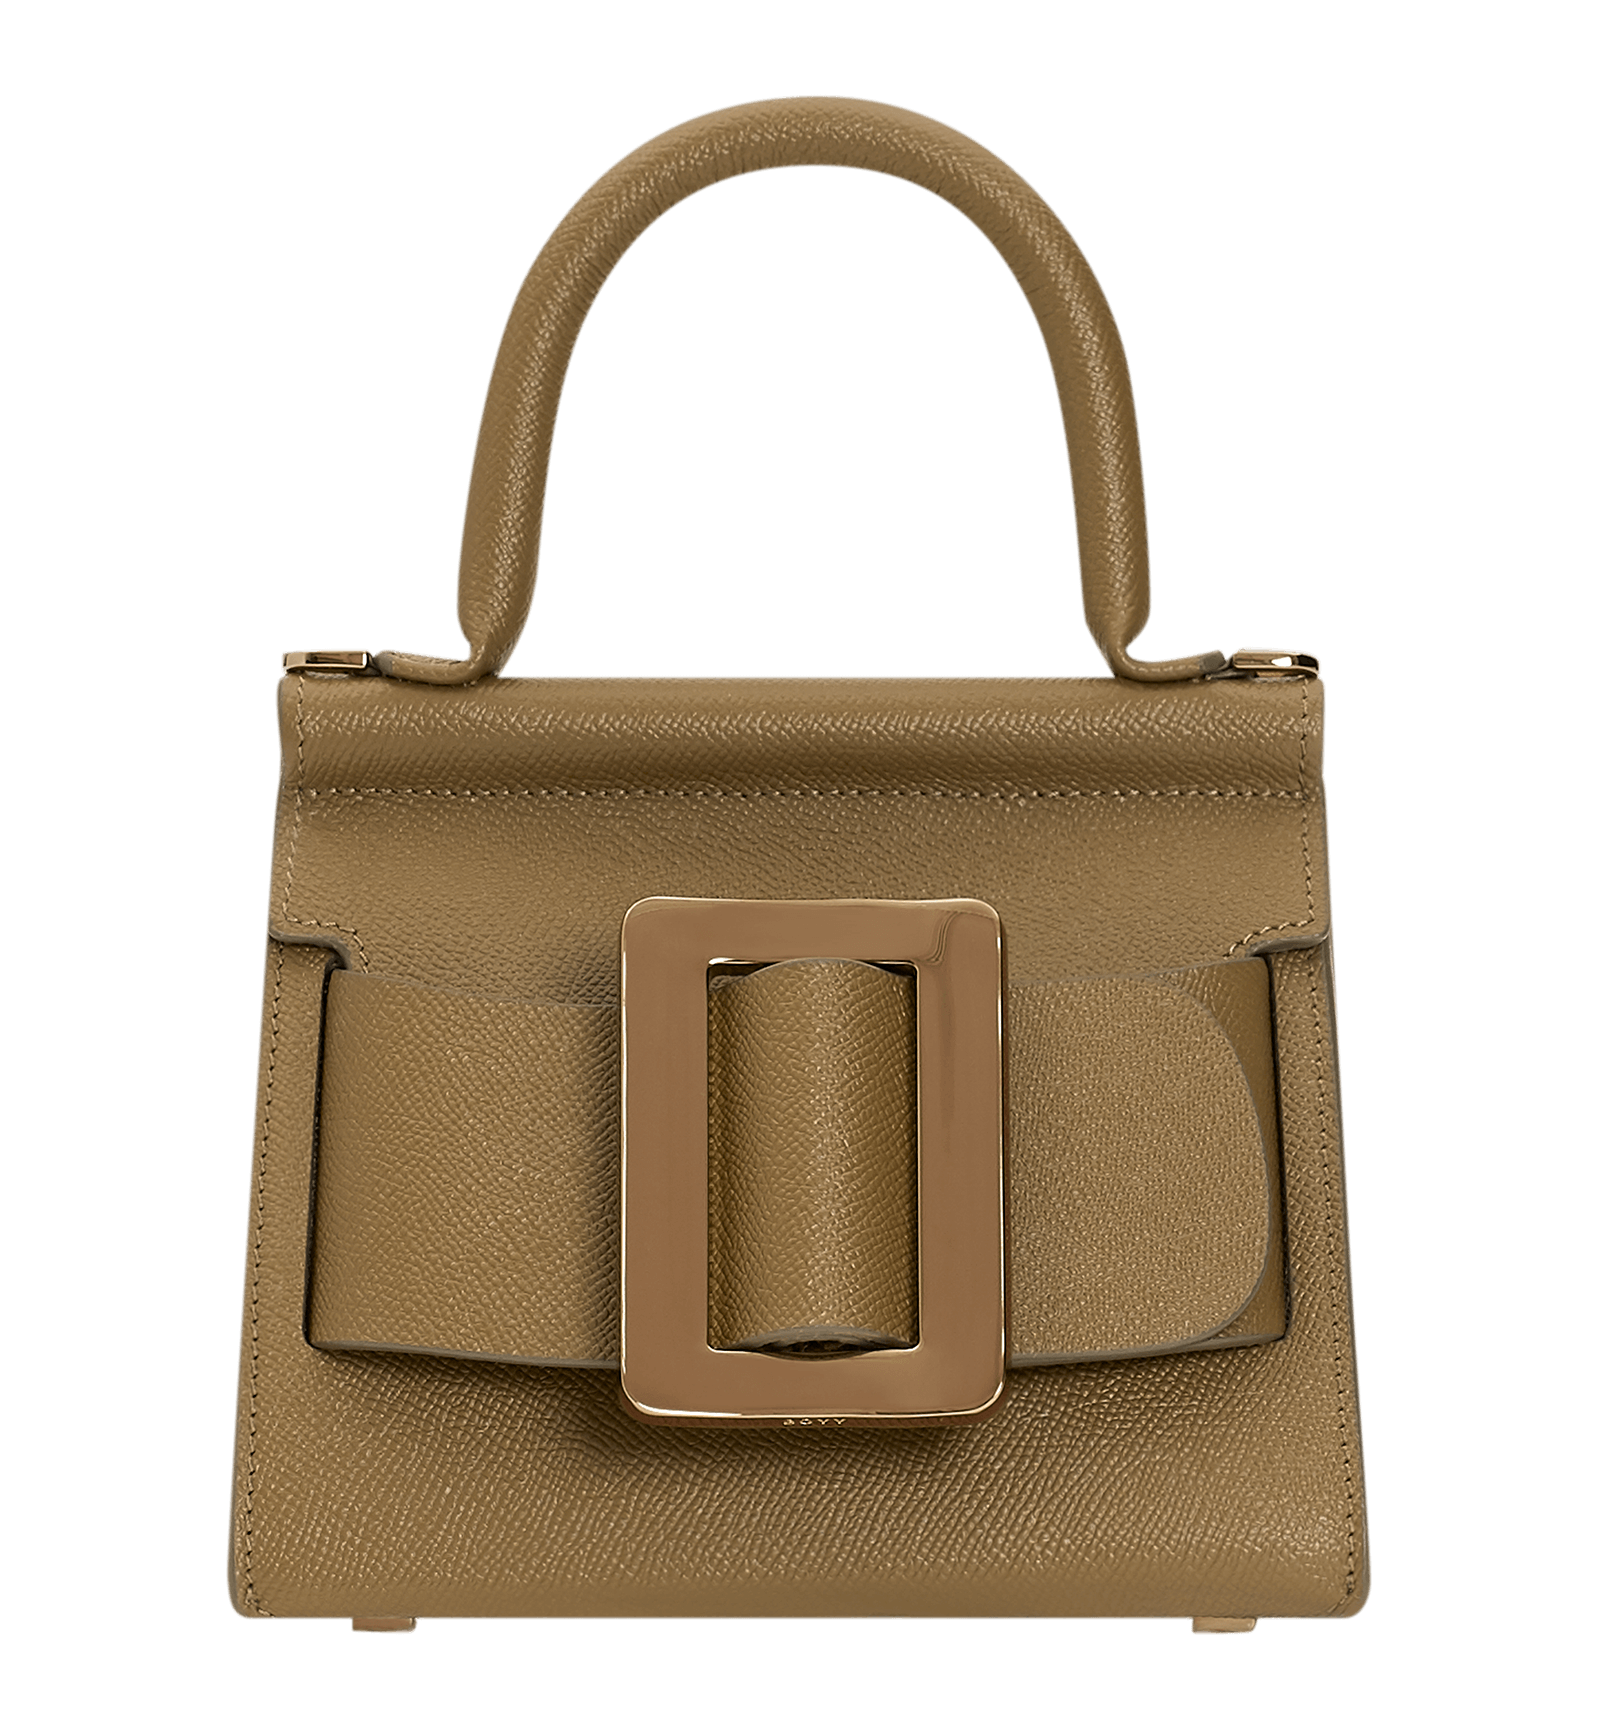 Brown, grained leather, structured handbag with an oversized gold buckle, single carry handle, carry strap, and front flap closure.